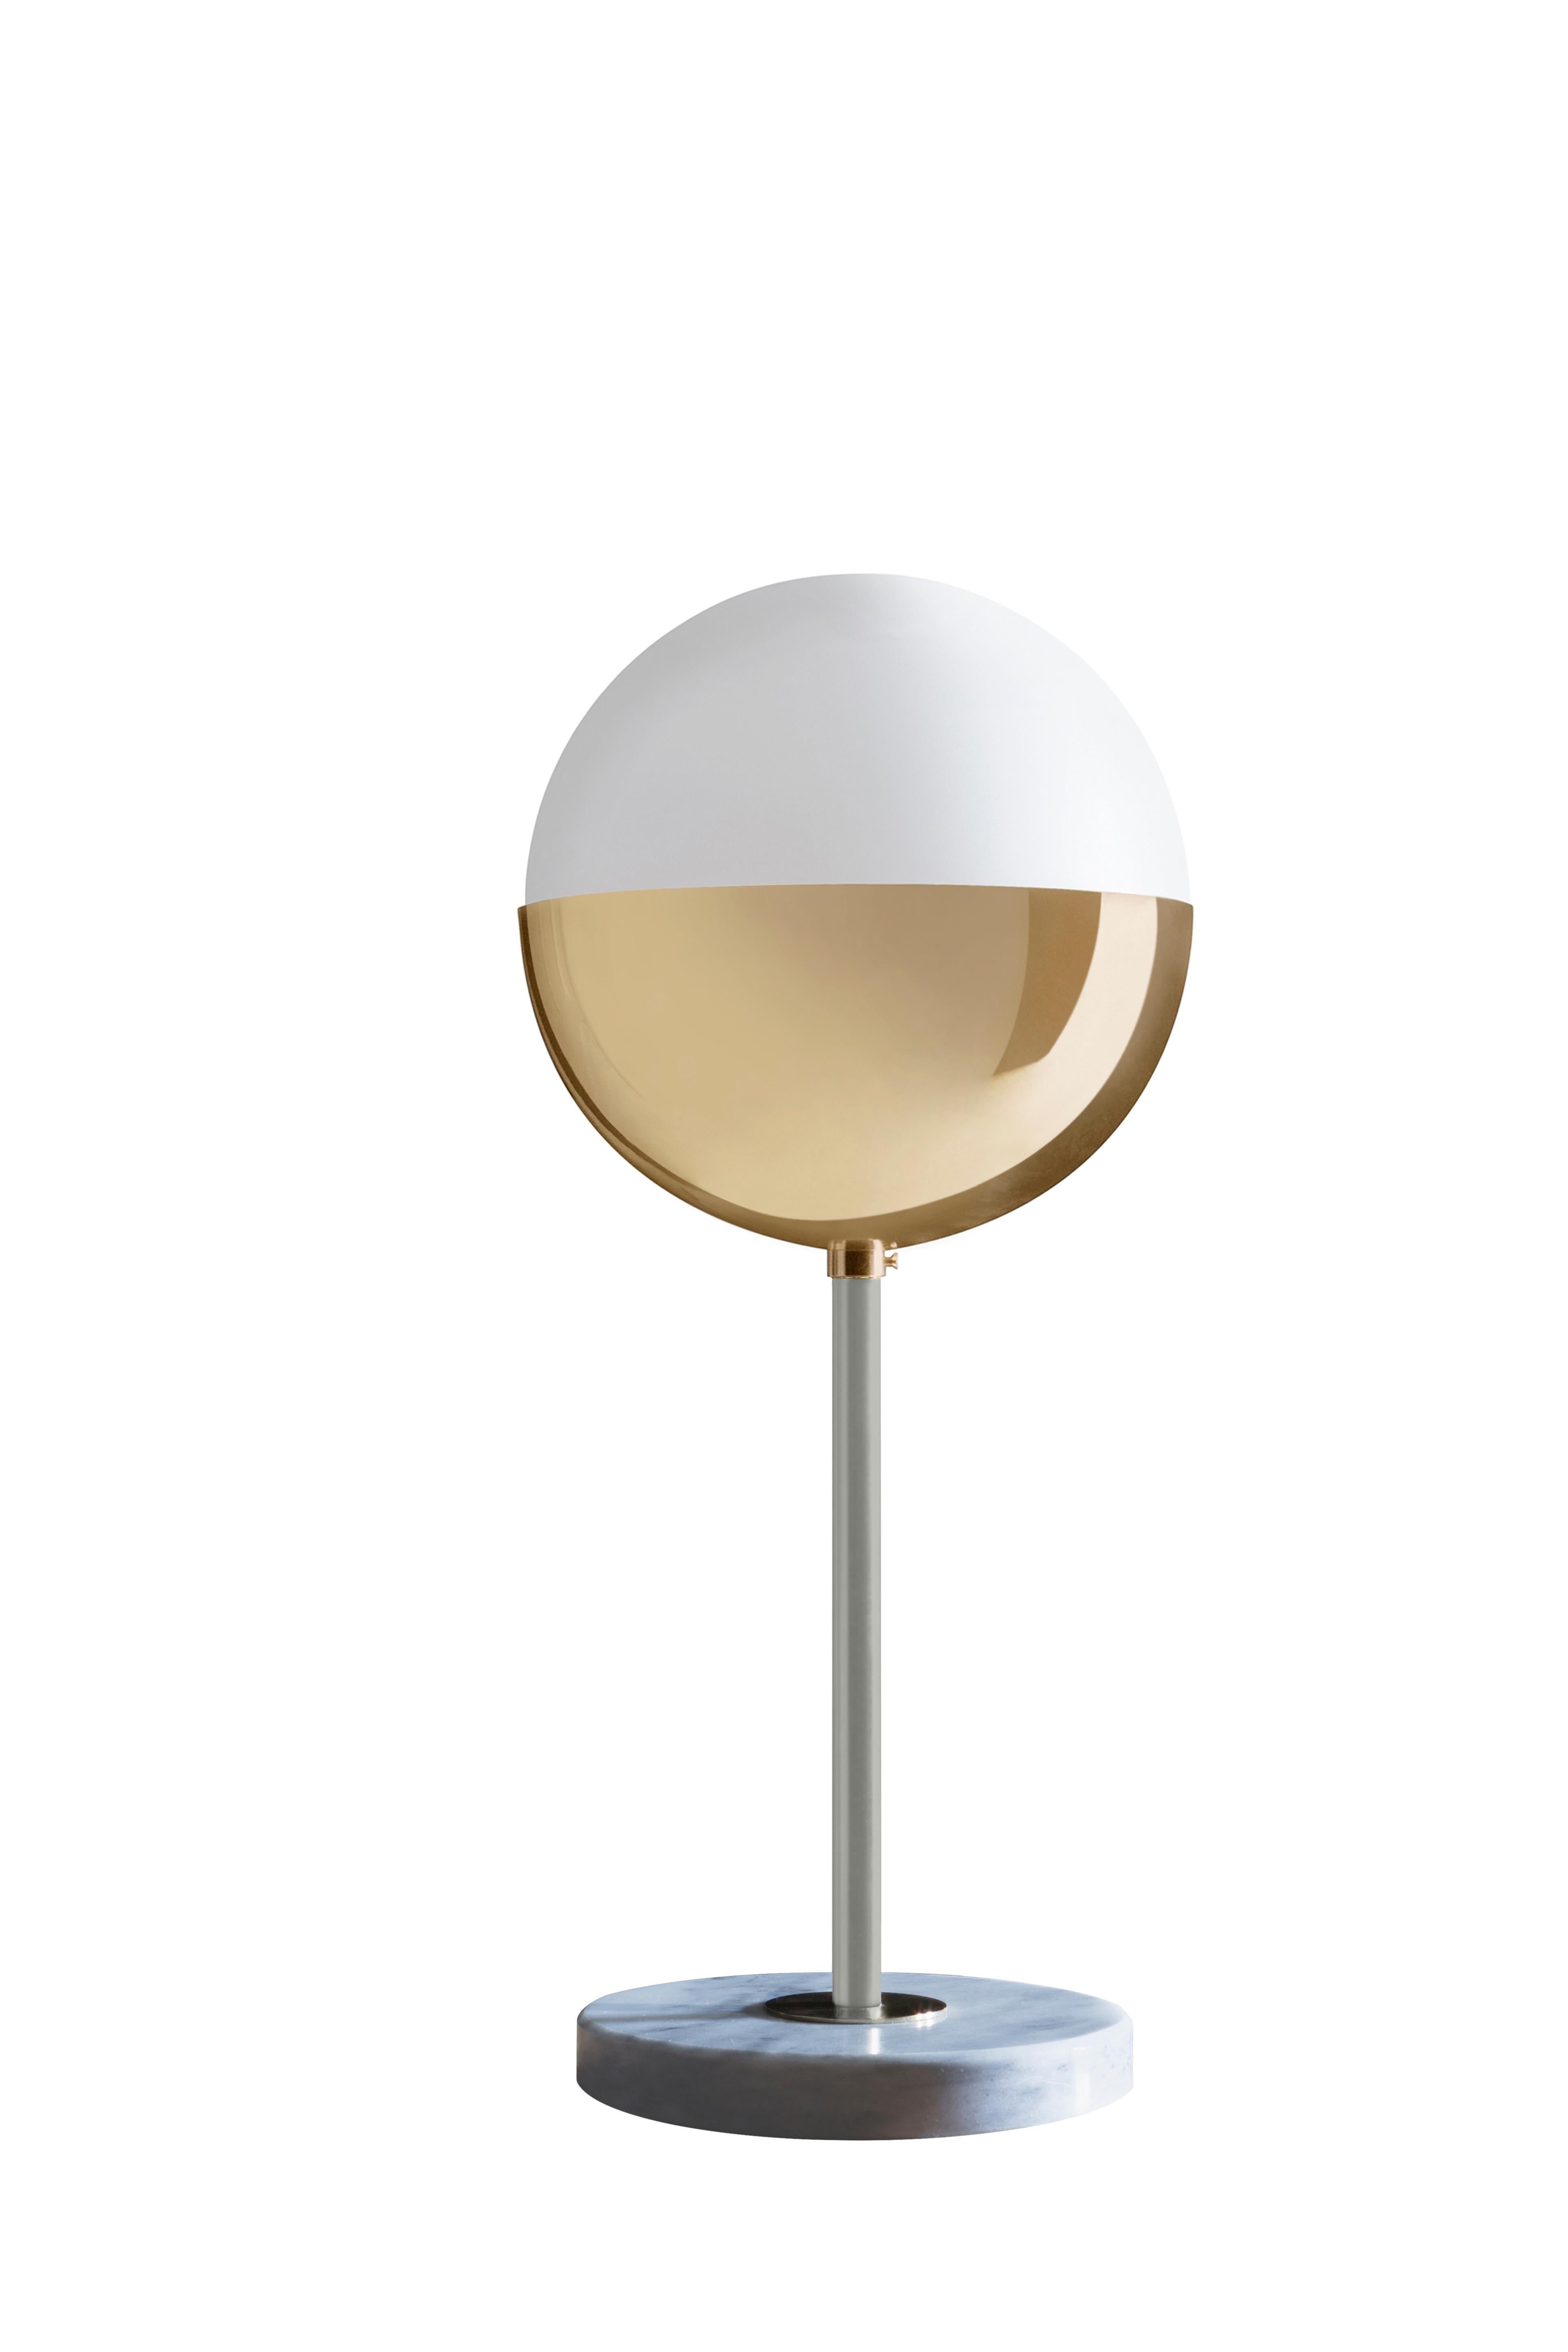 Set of 2 Marble table lamp 01 by Magic Circus Editions
Dimensions: H 50 x W 22 cm
 diameter spheres: 22 cm
Materials: Marble, Smooth brass, mouth blown glass
Dimmable version available. 
Available Finishes: Brass, nickel
Available colors